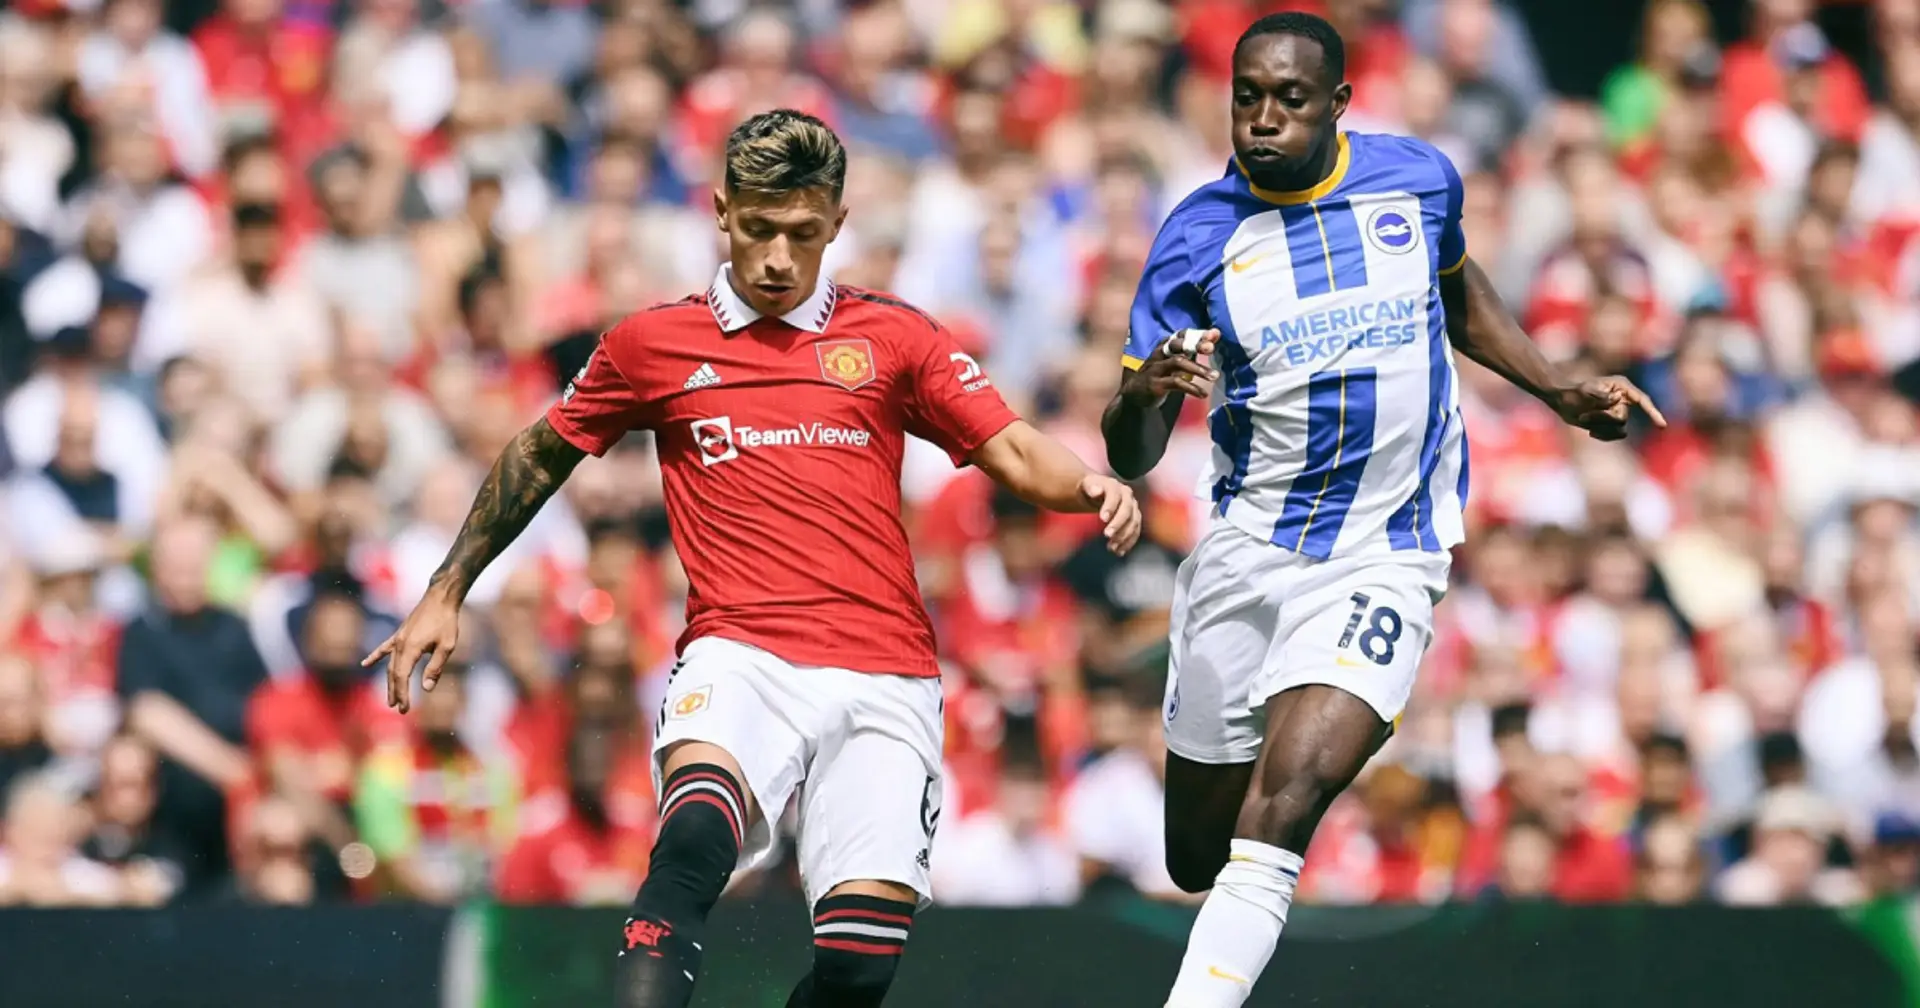 FT. Man United 1-2 Brighton: LIVE updates, stats, reactions, ratings & more